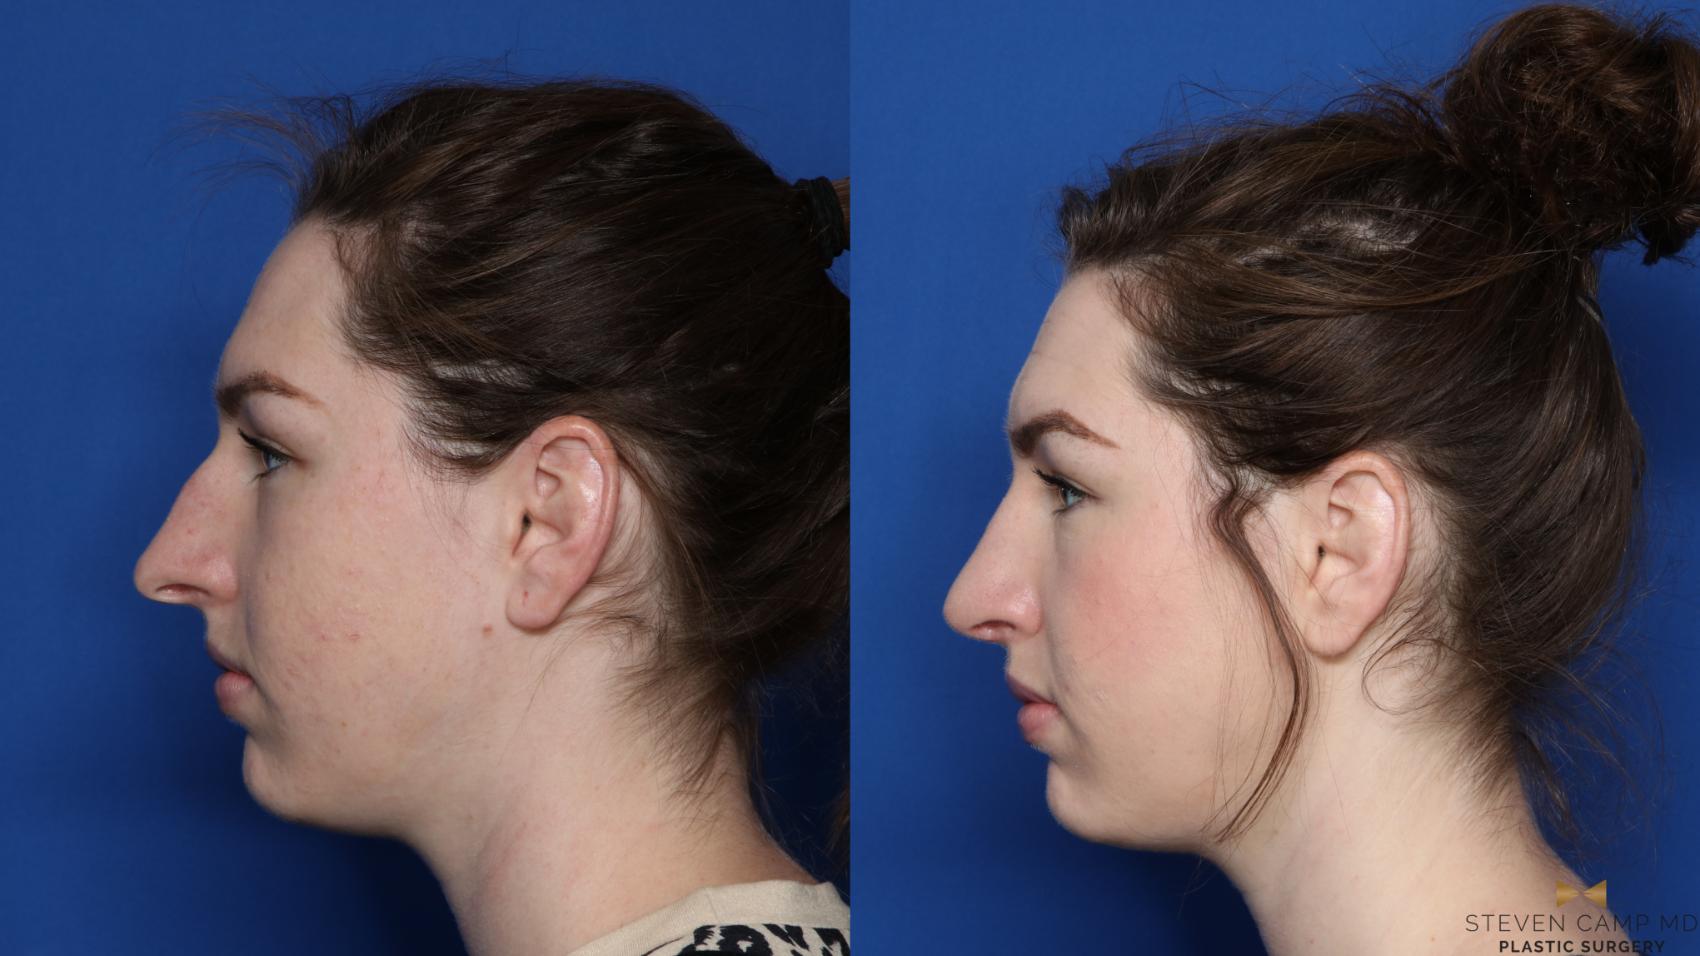 Rhinoplasty Before & After Photo | Fort Worth, Texas | Steven Camp MD Plastic Surgery